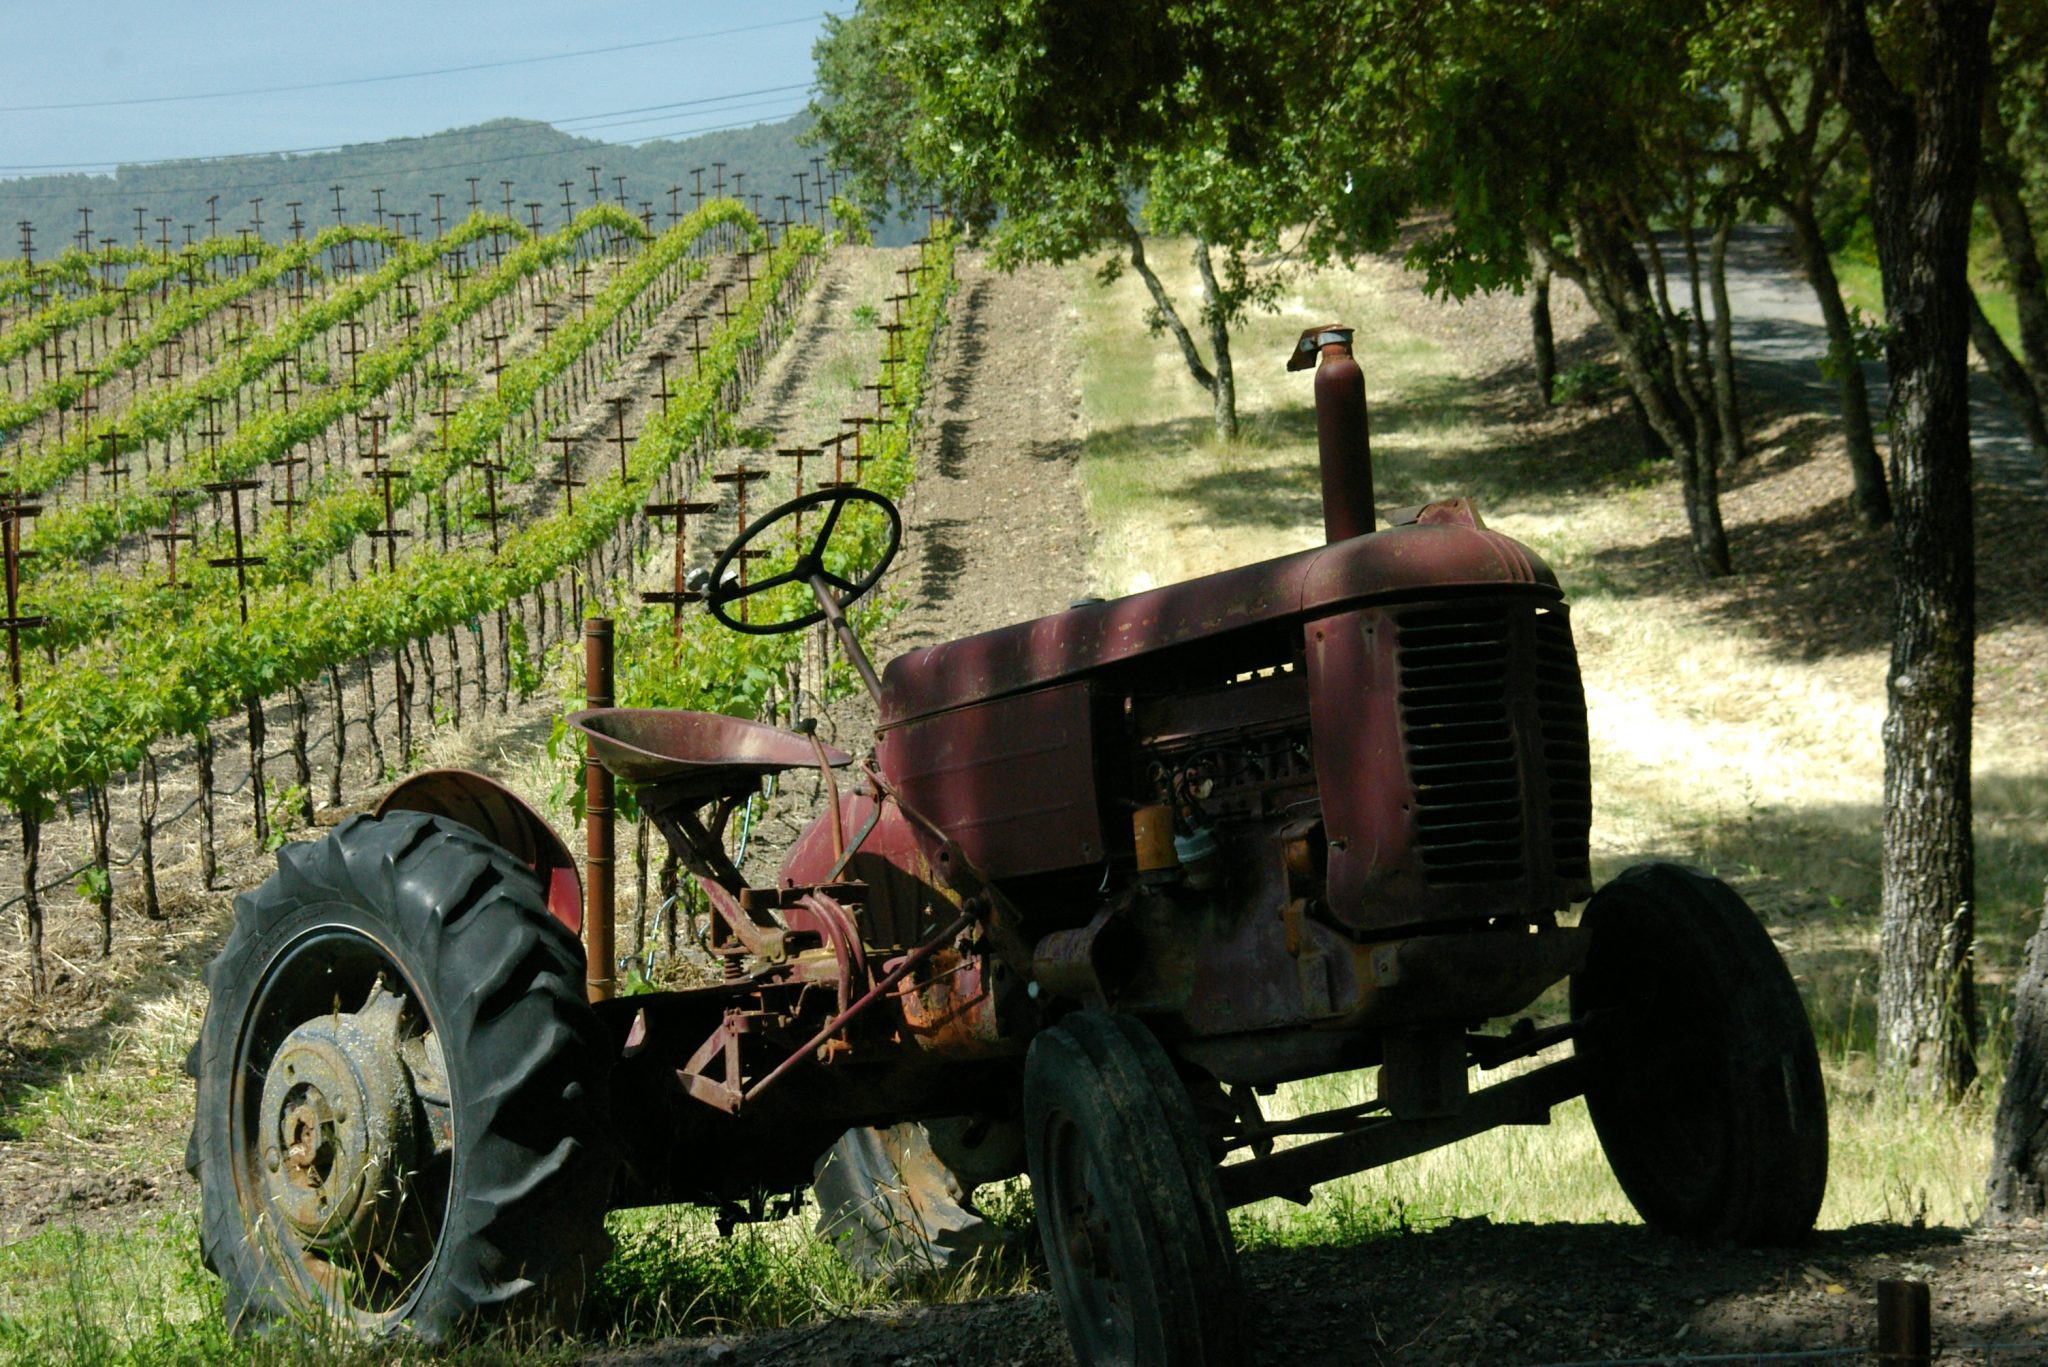 Old Tractor in a vineyard in Sonoma Wine Country